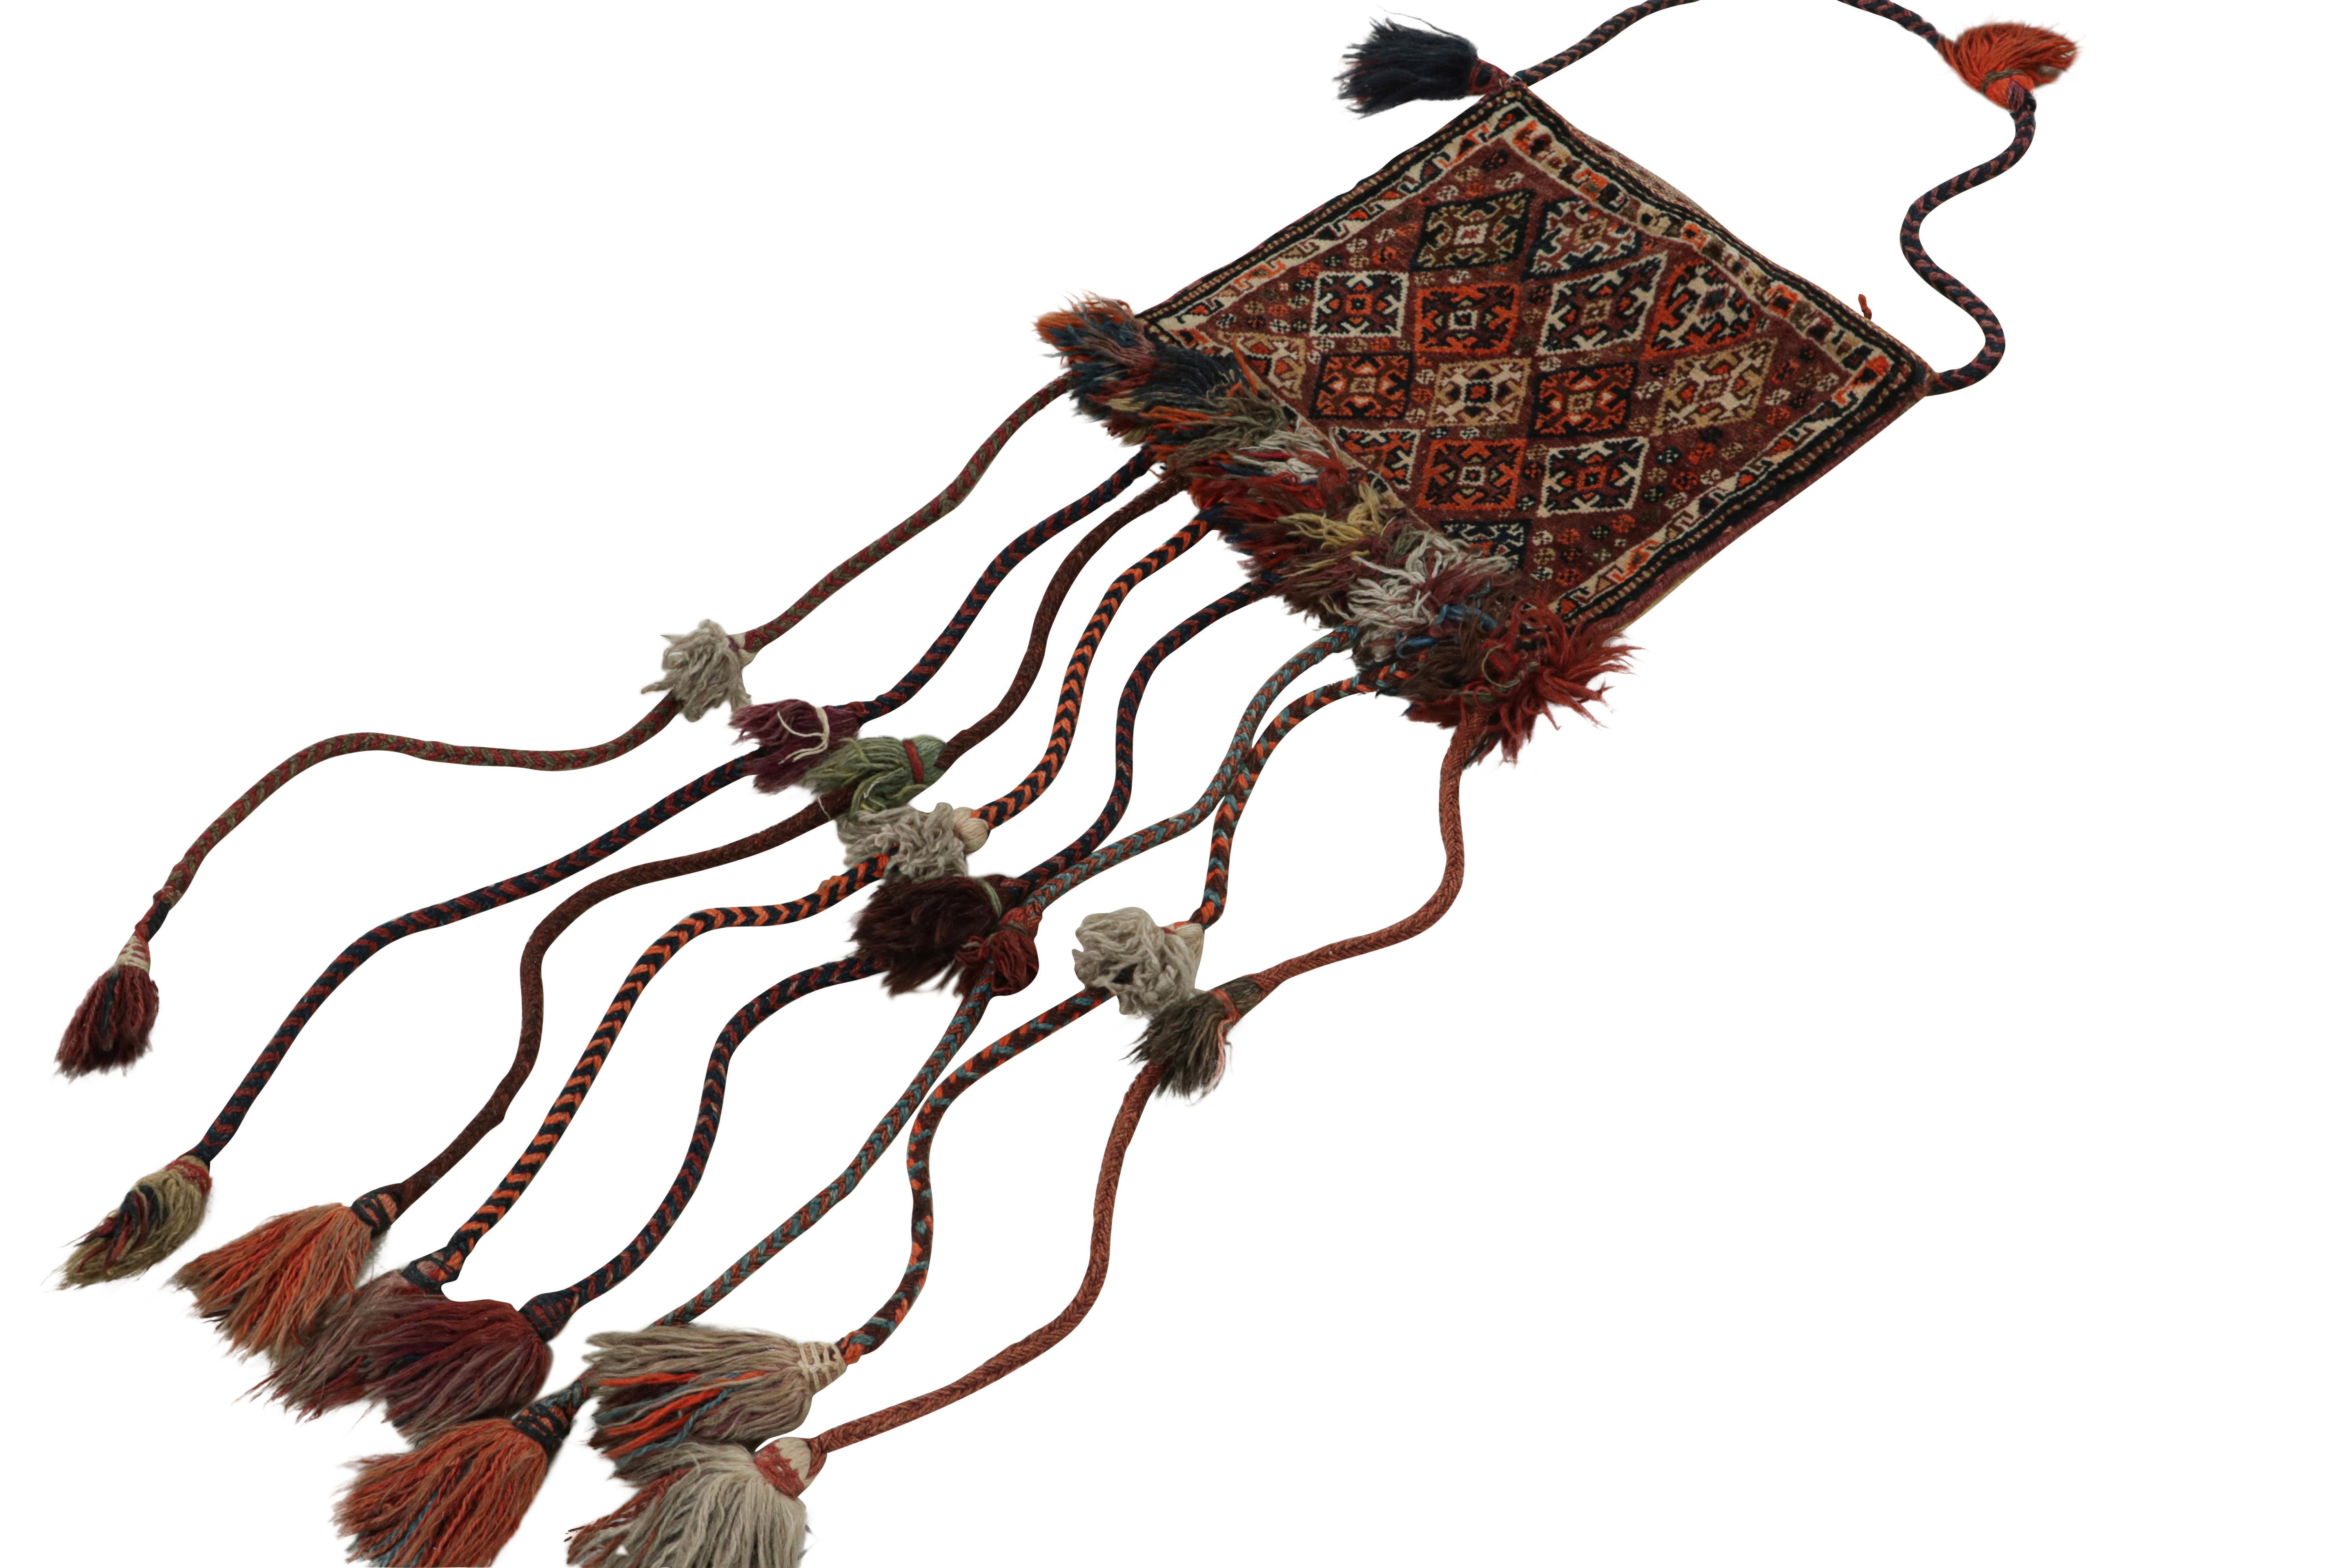 Handwoven in wool circa 1910-1920, this item is a rare antique Persian tribal salt bag, once used to store salt for cooking and for migration purposes by nomadic tribes.

On the Design:

The center of the piece is a hand-knotted 1x1 square, with